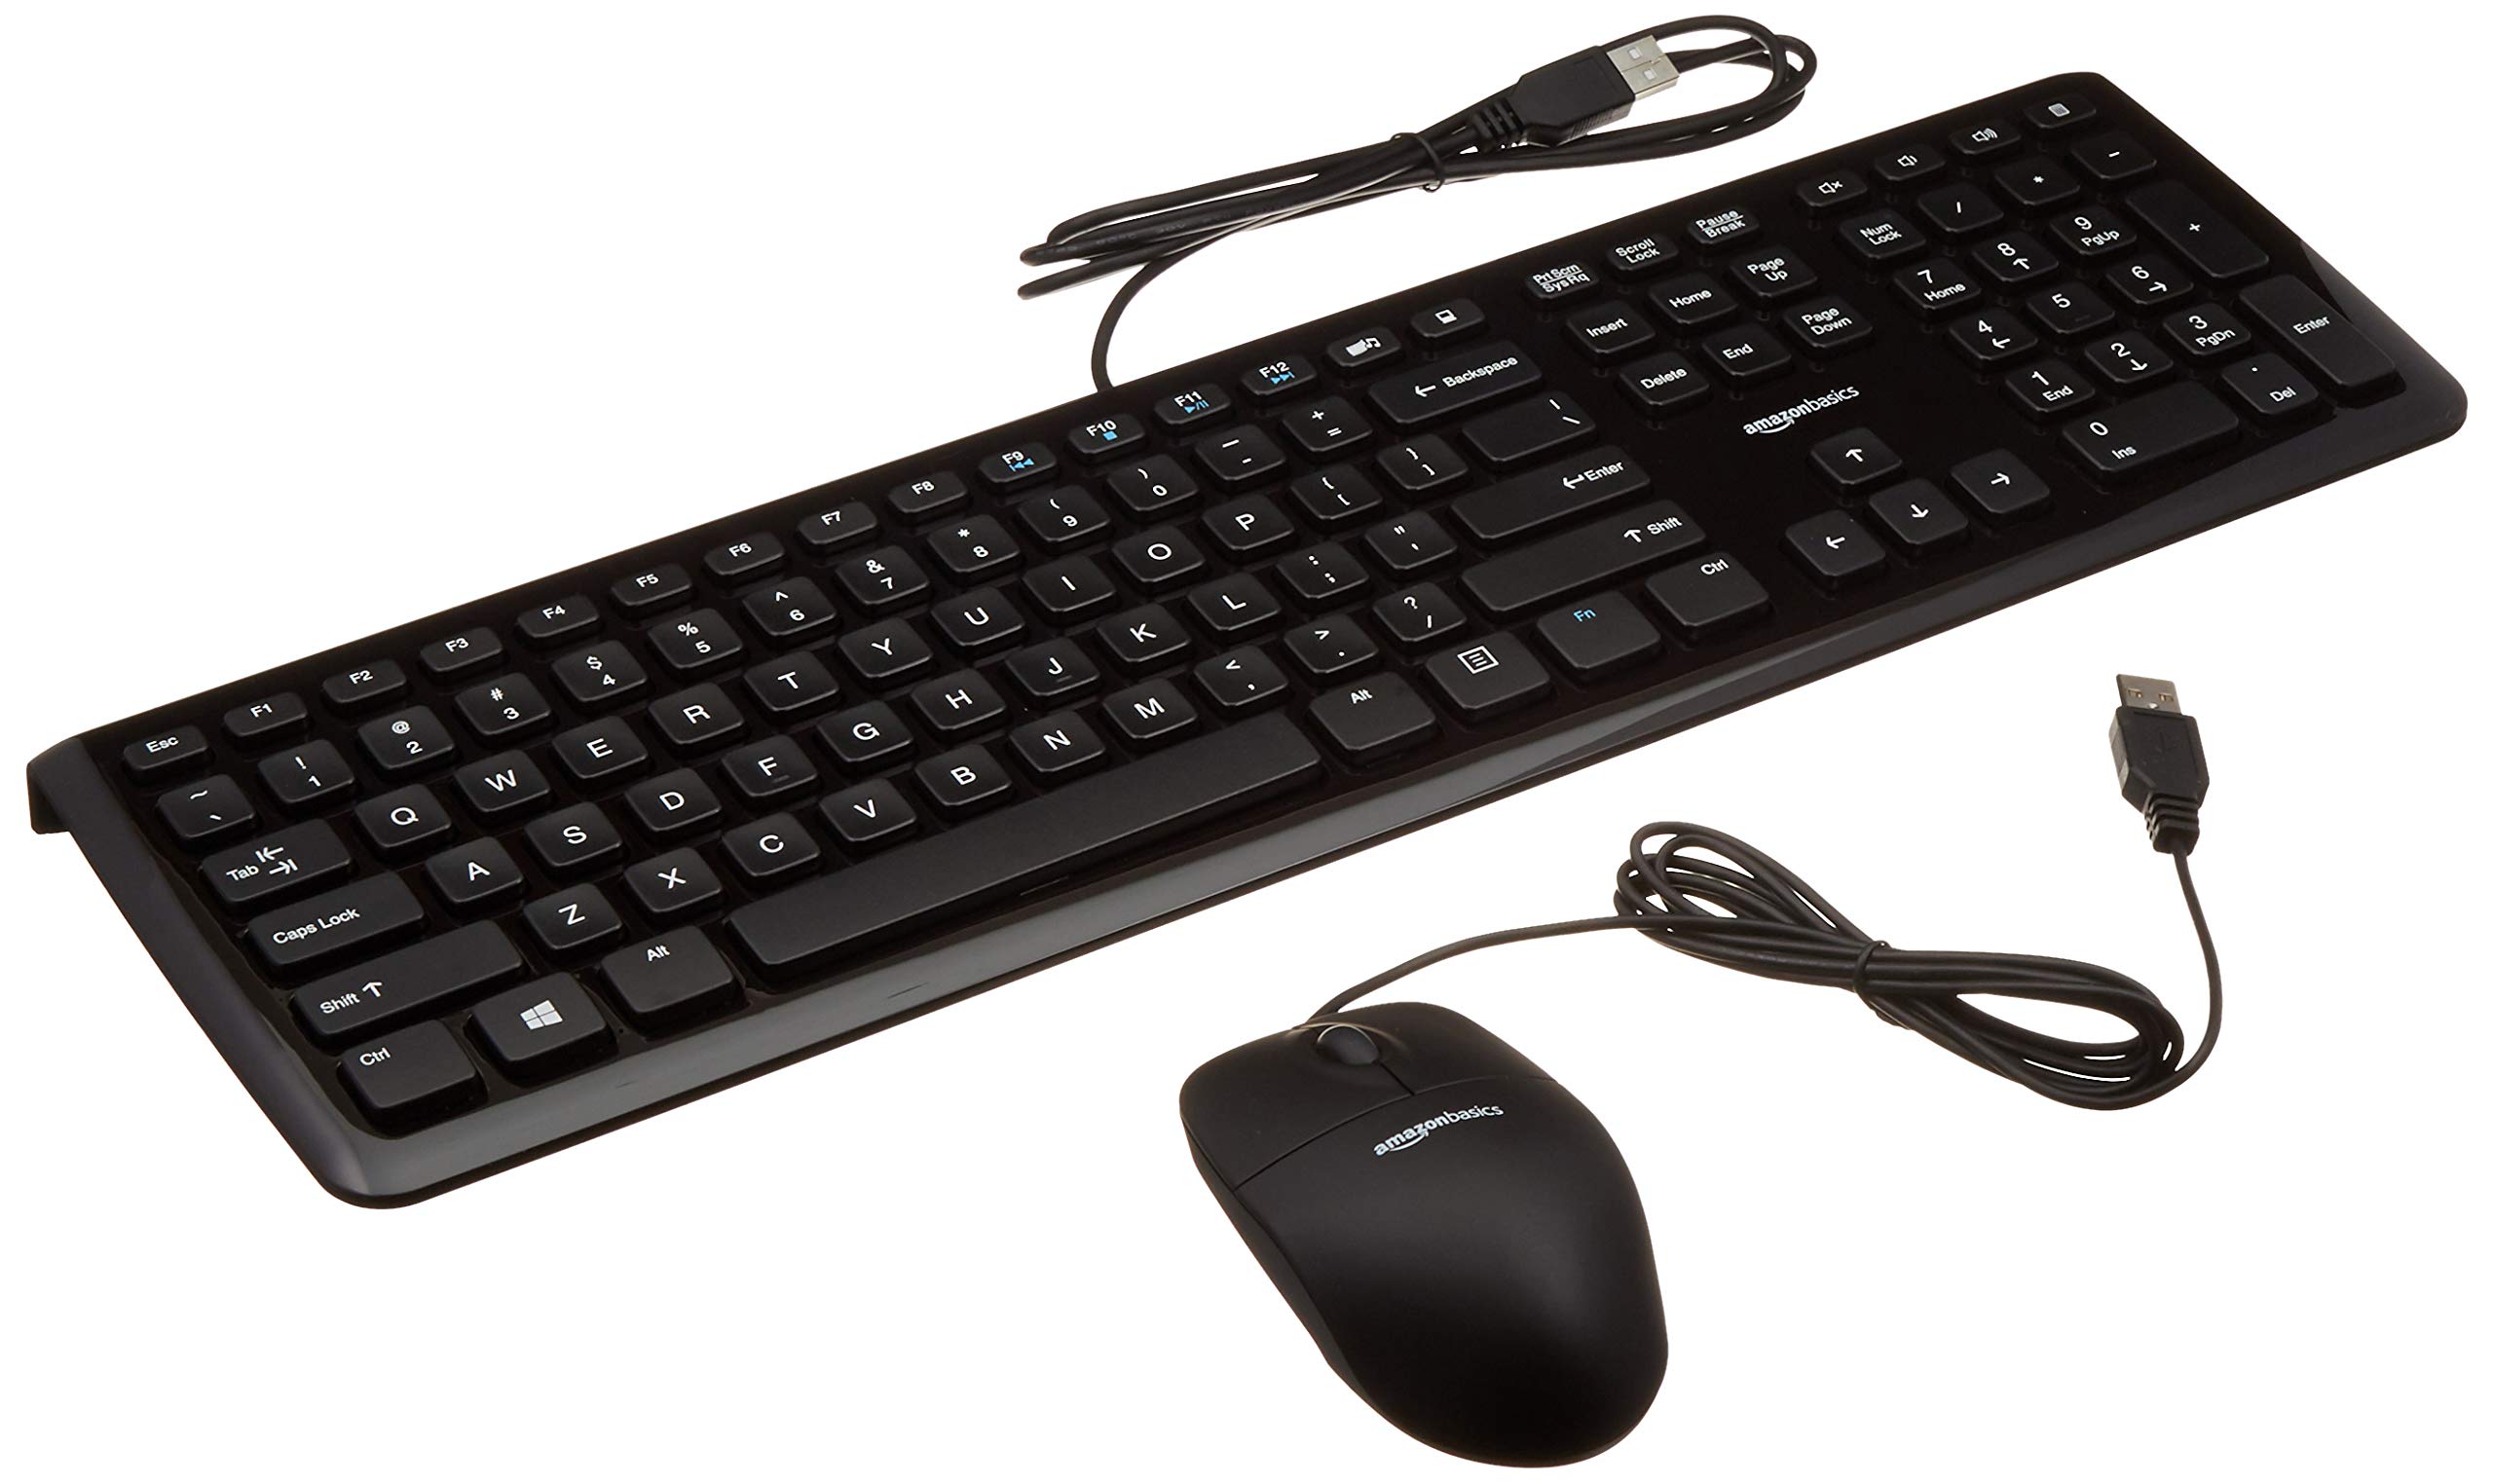 Amazon Basics USB Wired Computer Keyboard (QWERTY) and Mouse Bundle Pack, black